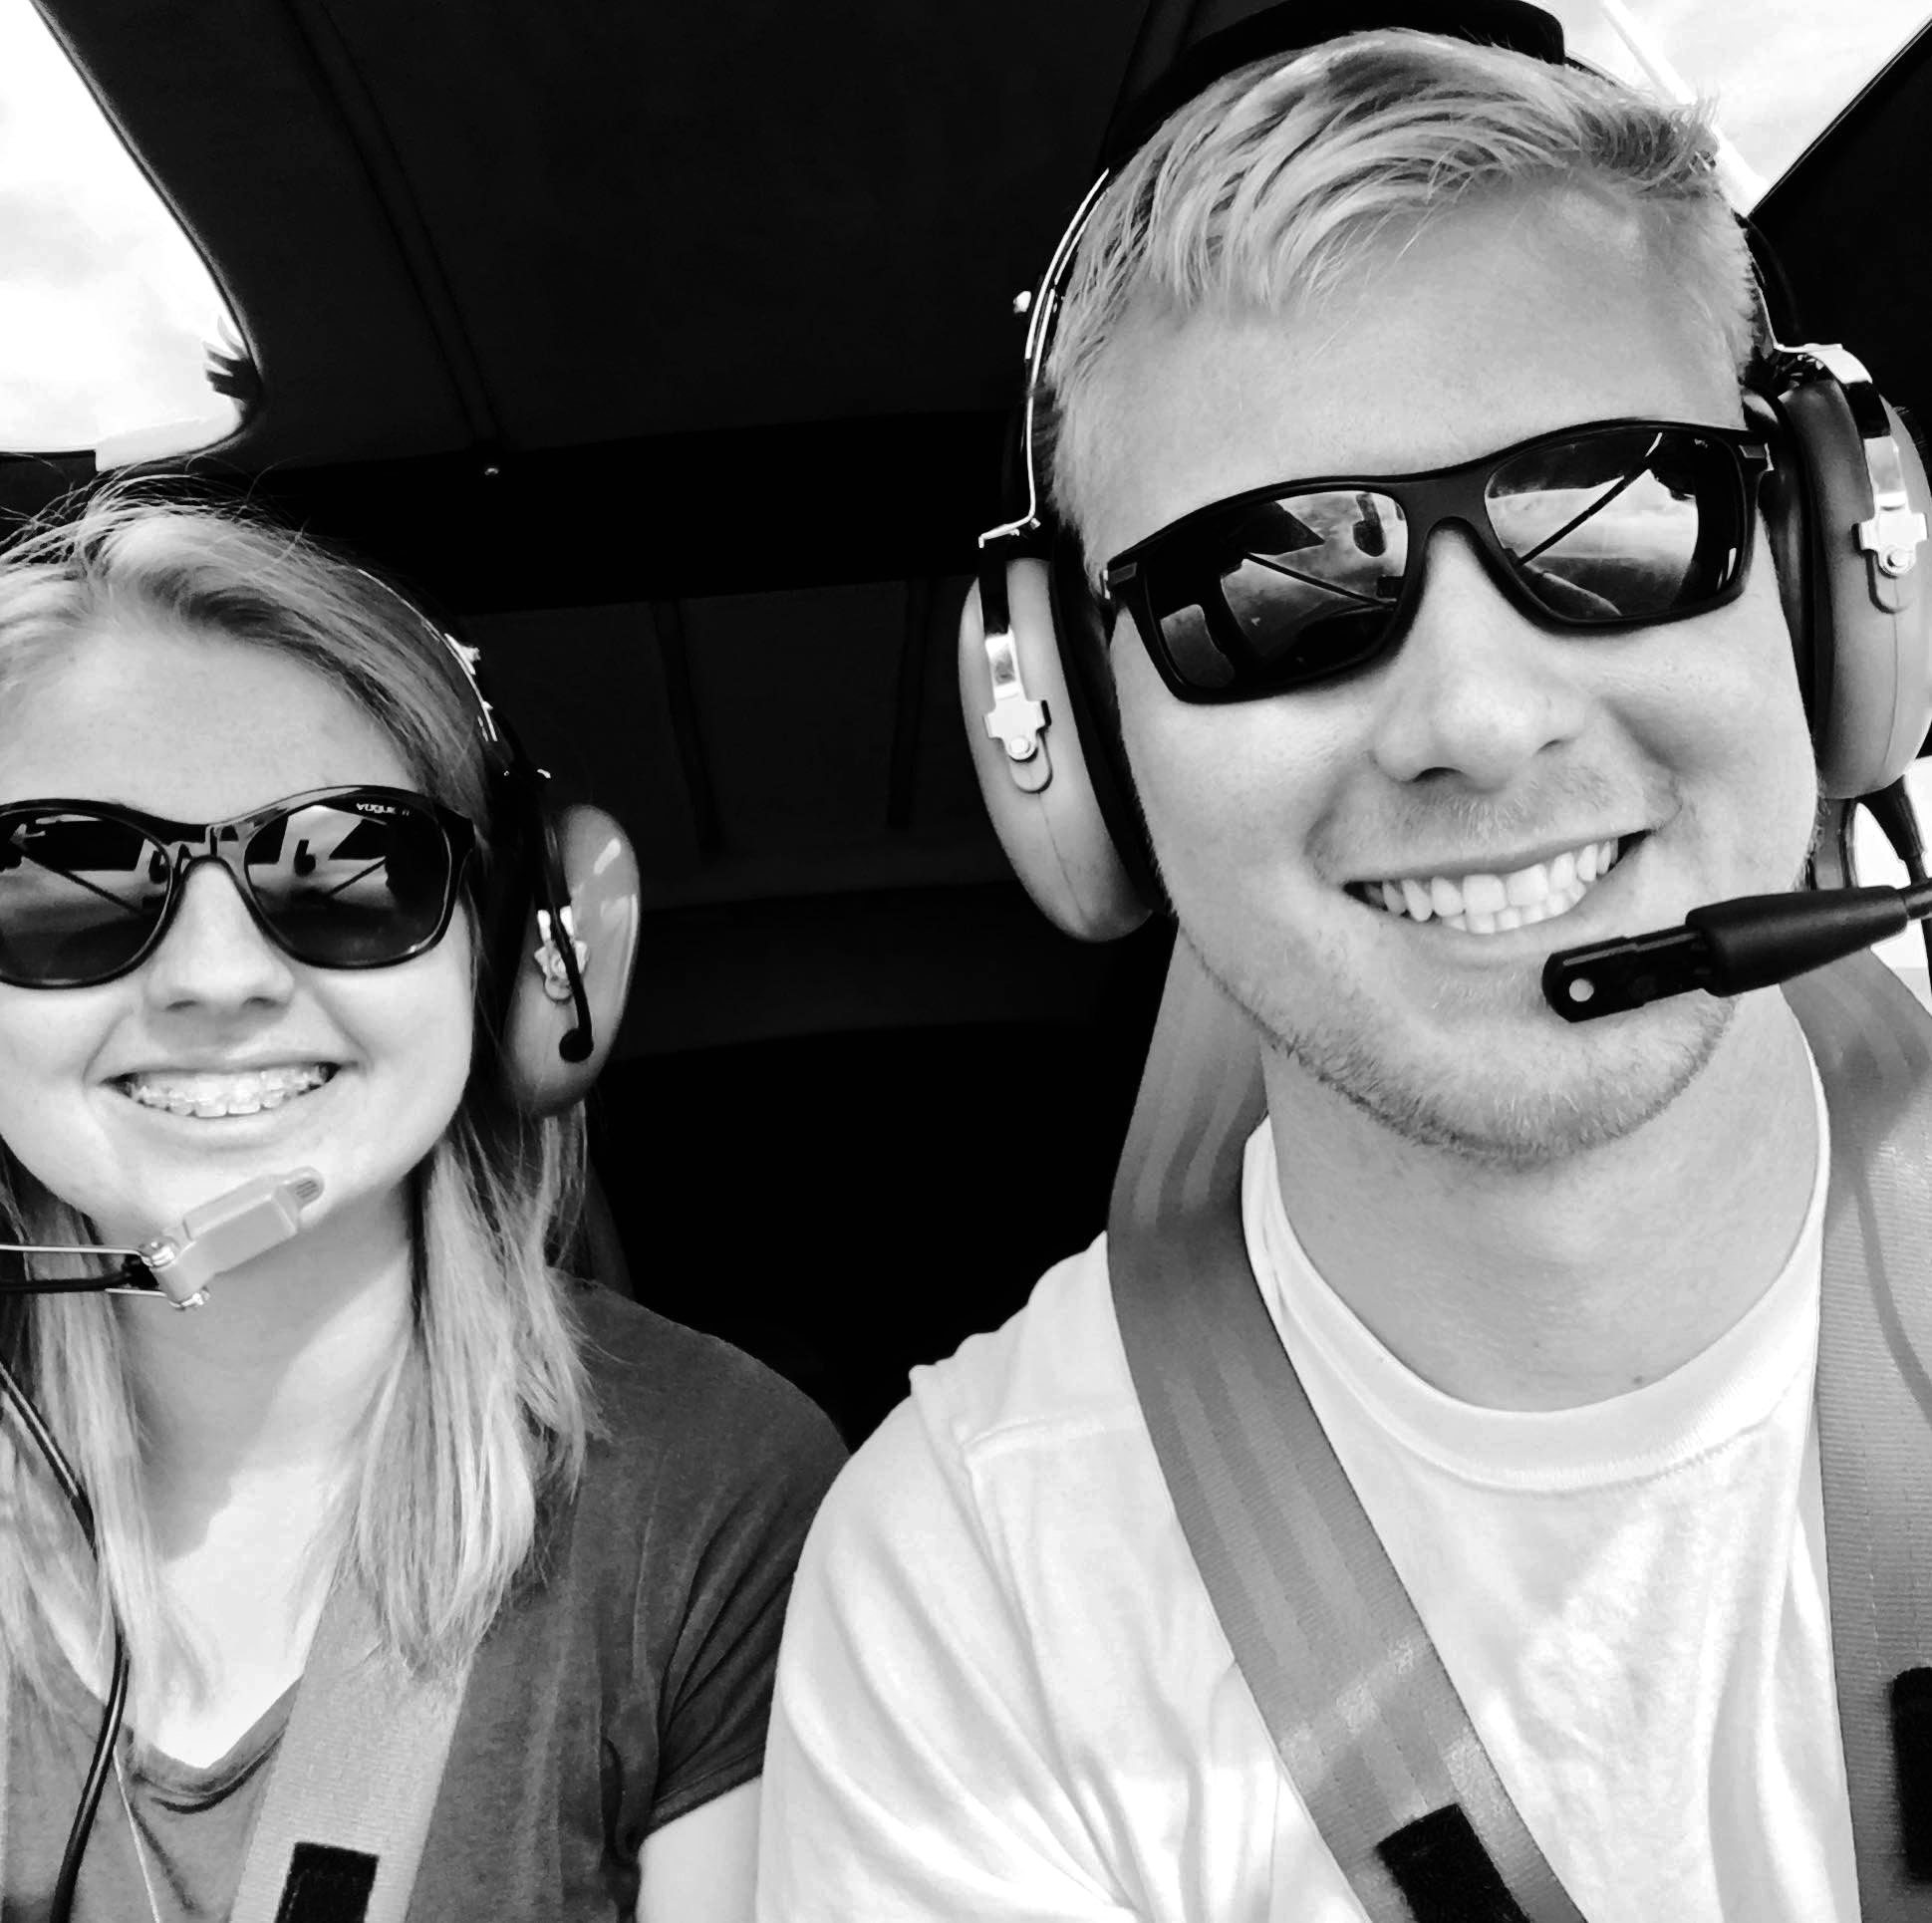 Samantha Sky Hagan and Kyle Fosso hope to fly to all 50 states while producing videos championing the benefit of general aviation. Photo courtesy of Kyle Fosso.